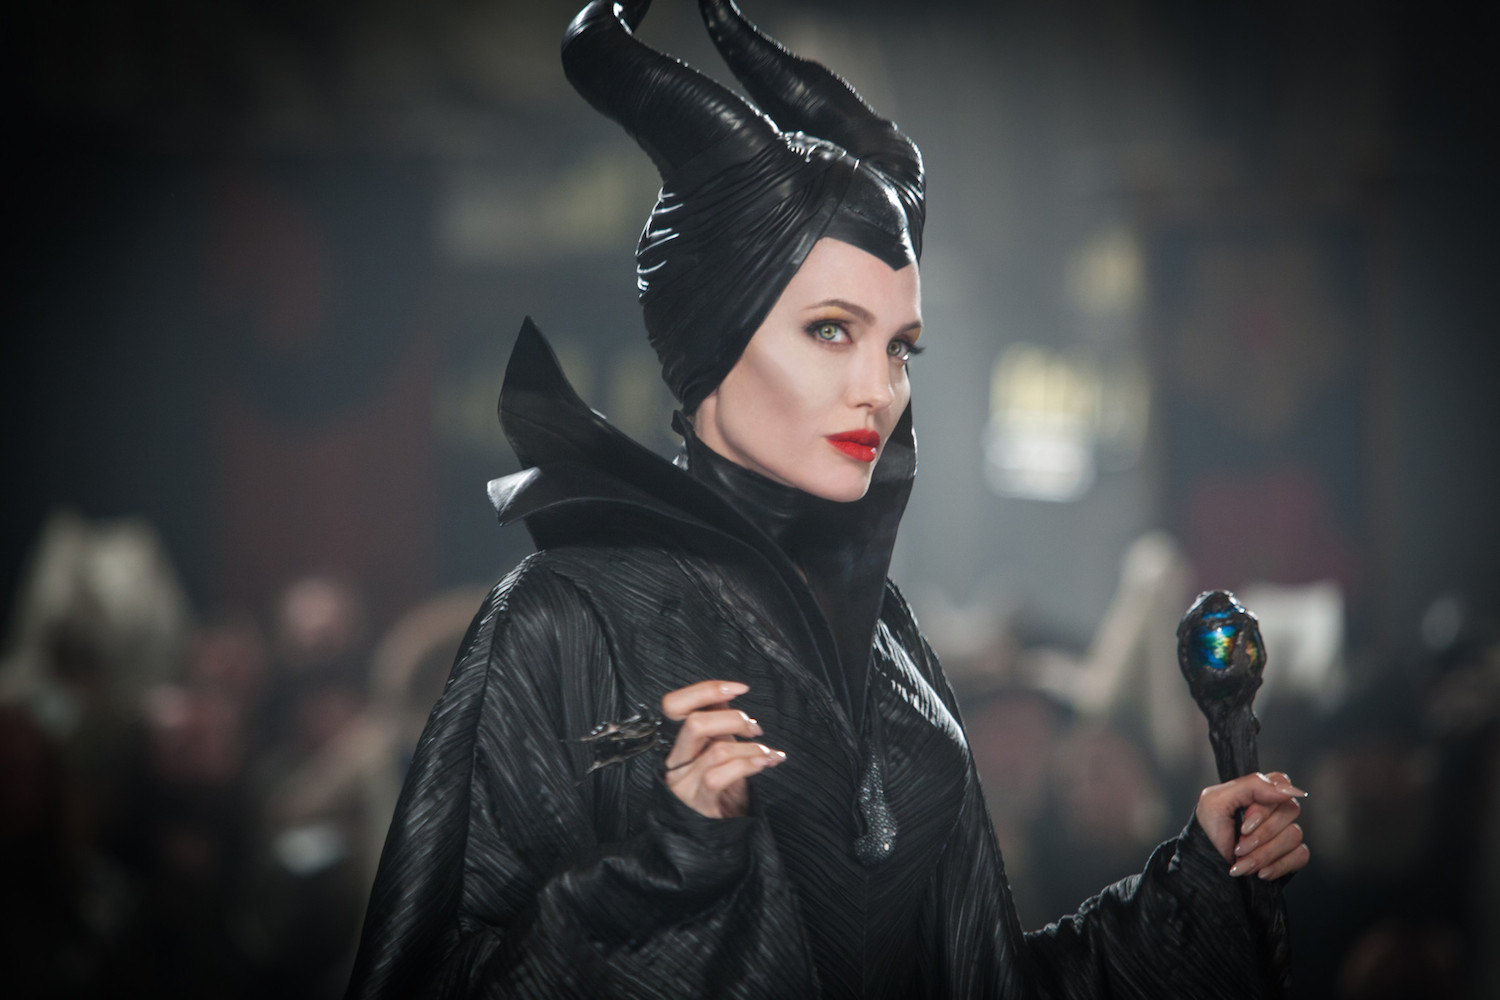 Q&A With Manuel Albarran Who Dressed Angelina Jolie’s “Maleficent” In Bones and Teeth